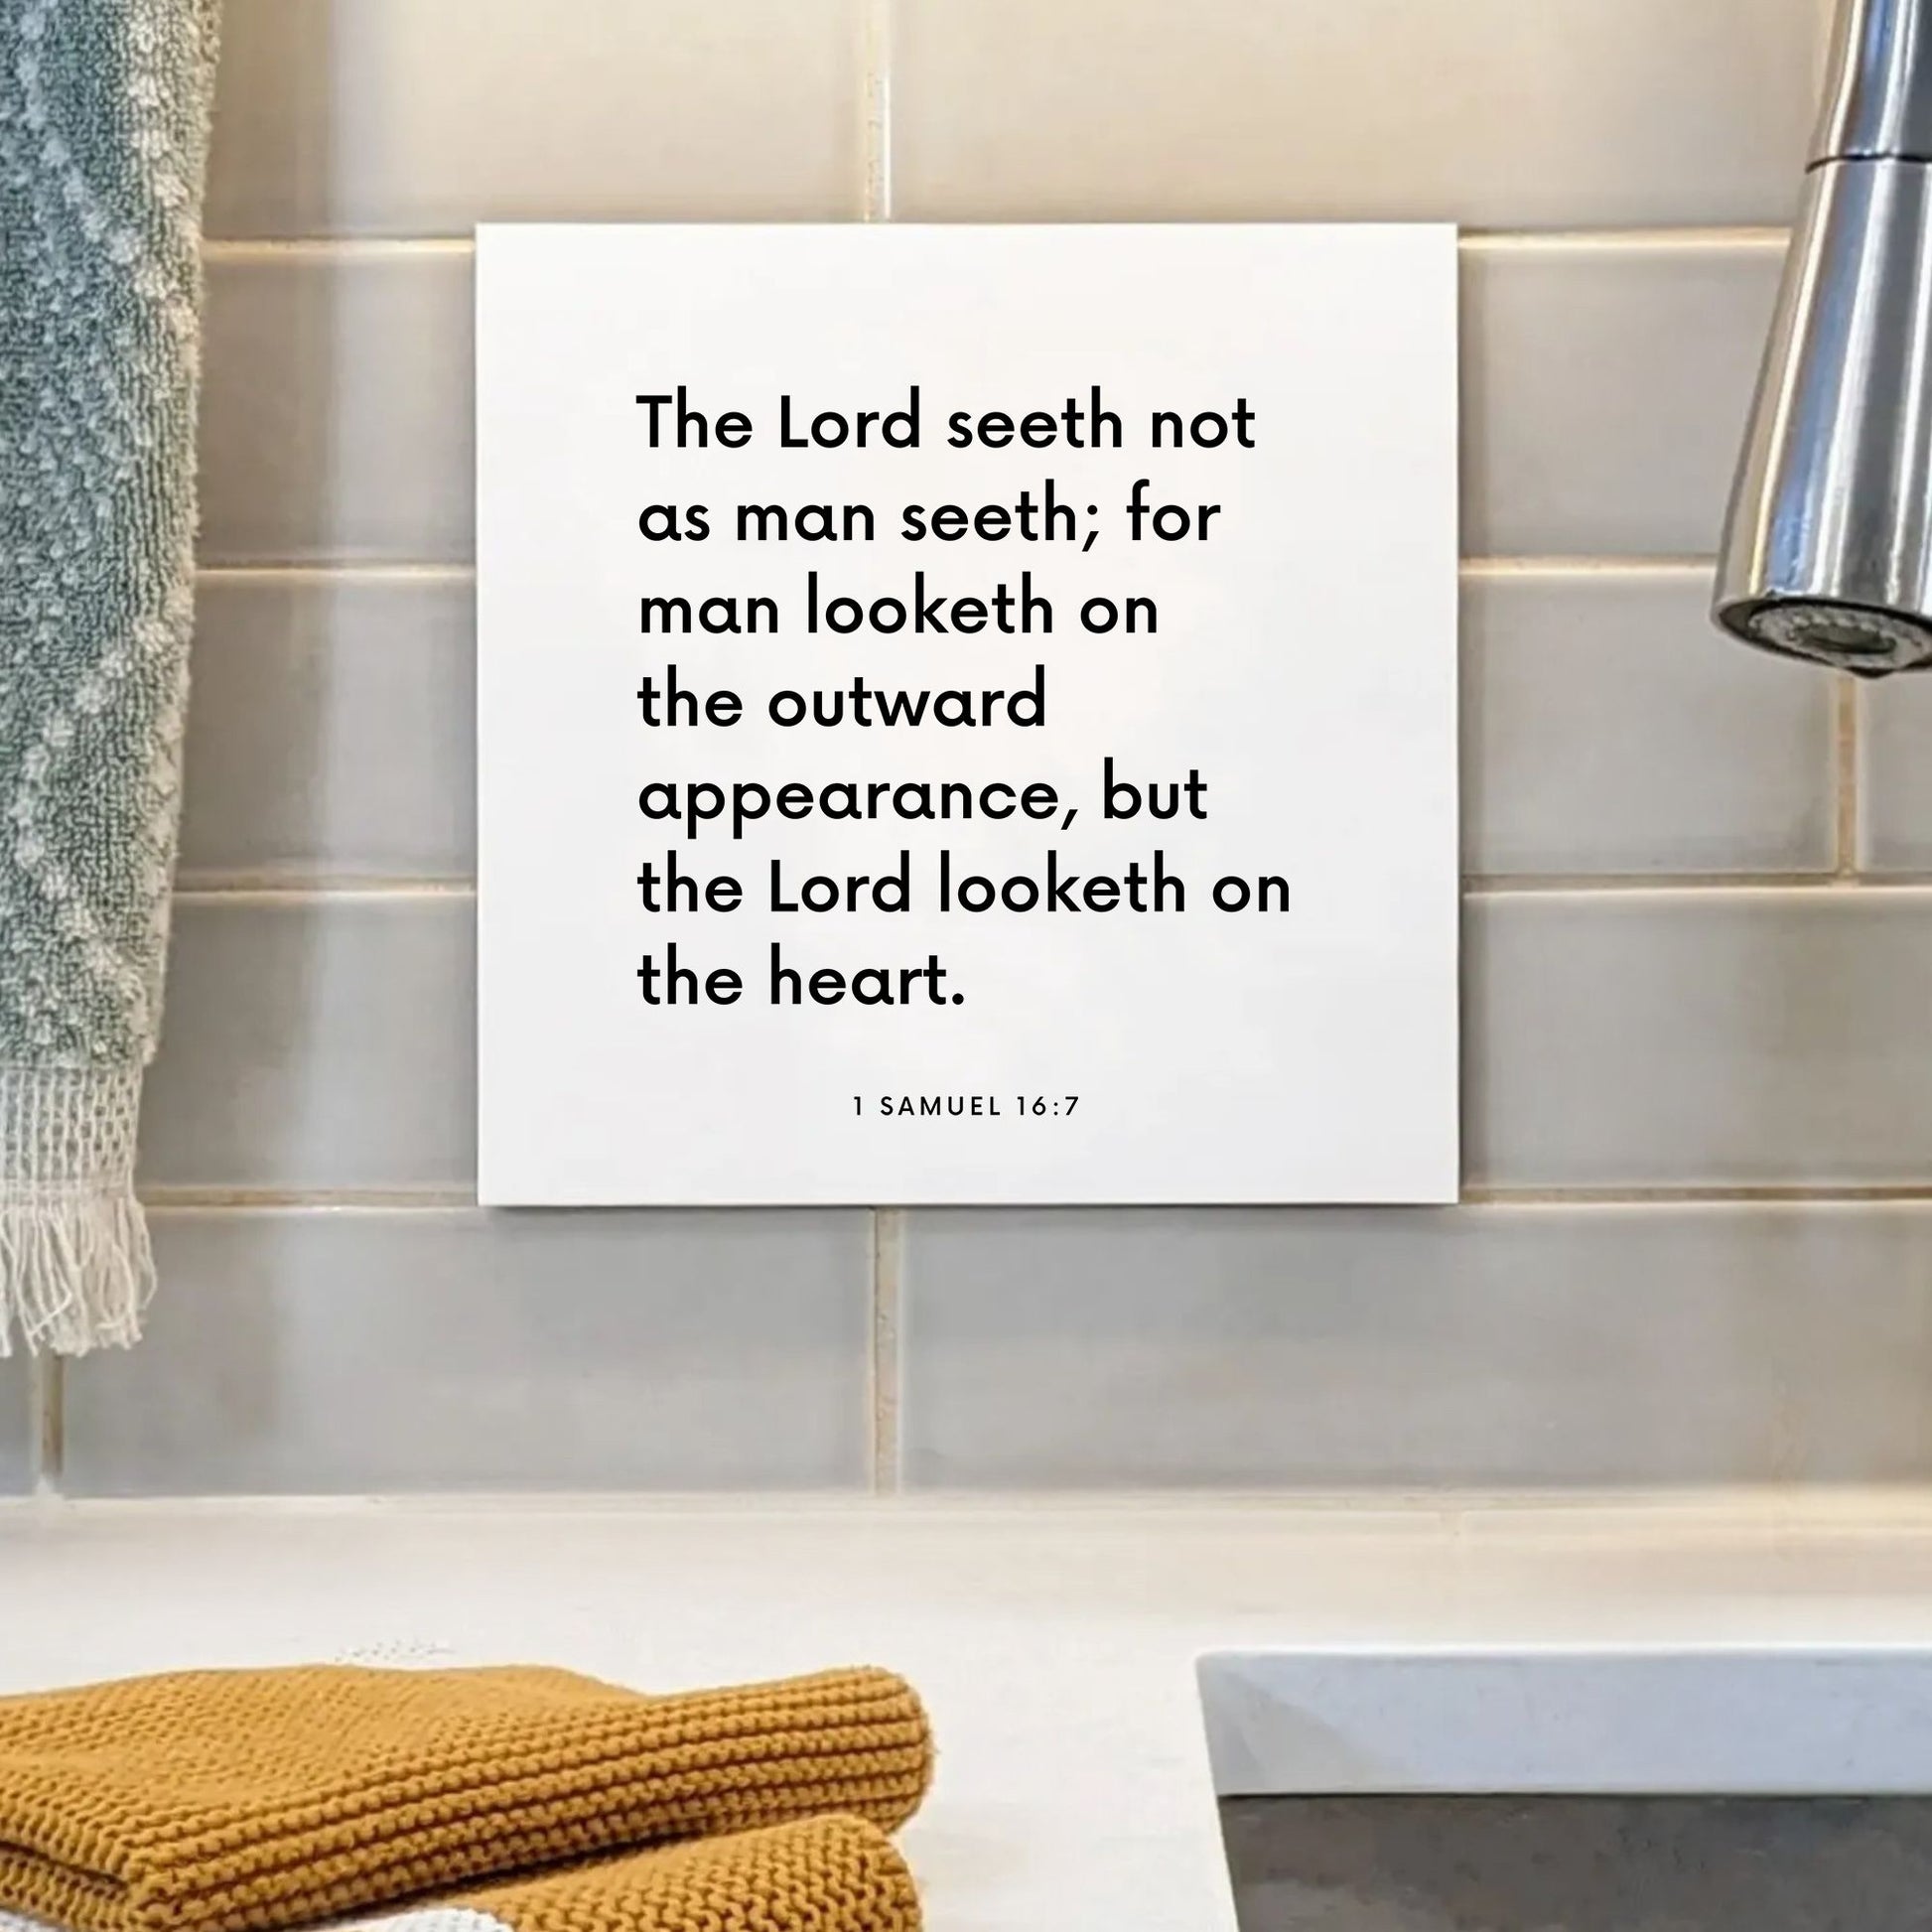 Sink mouting of the scripture tile for 1 Samuel 16:7 - "The Lord seeth not as man seeth"